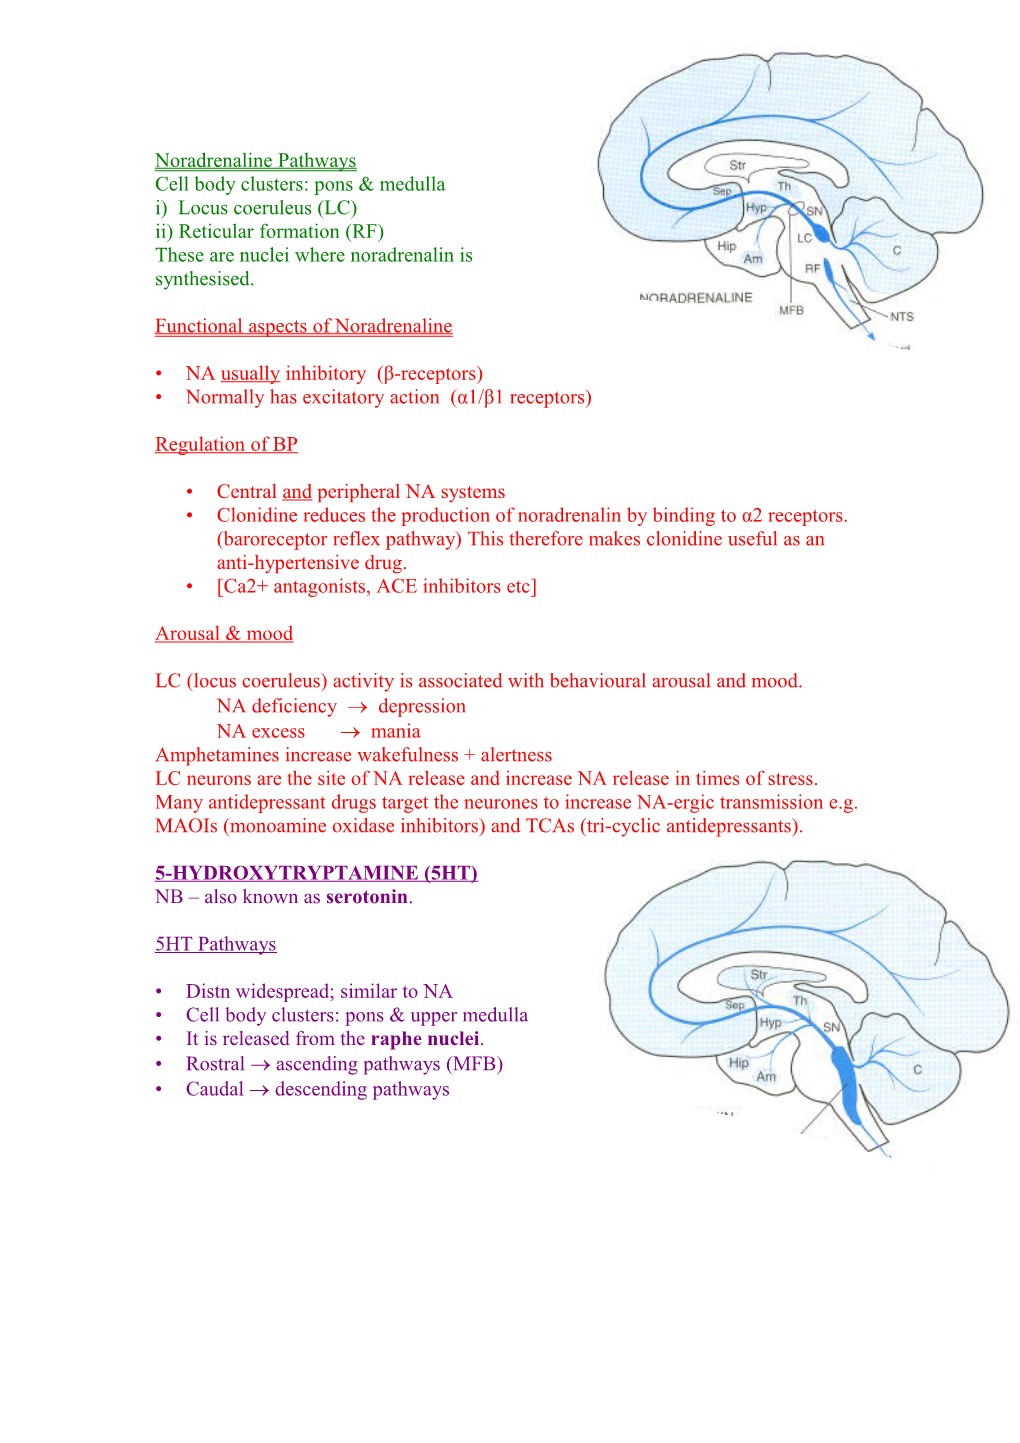 1. Outline the Course and Function of the 3 Diffuse Monoaminergic Pathways in the Brain